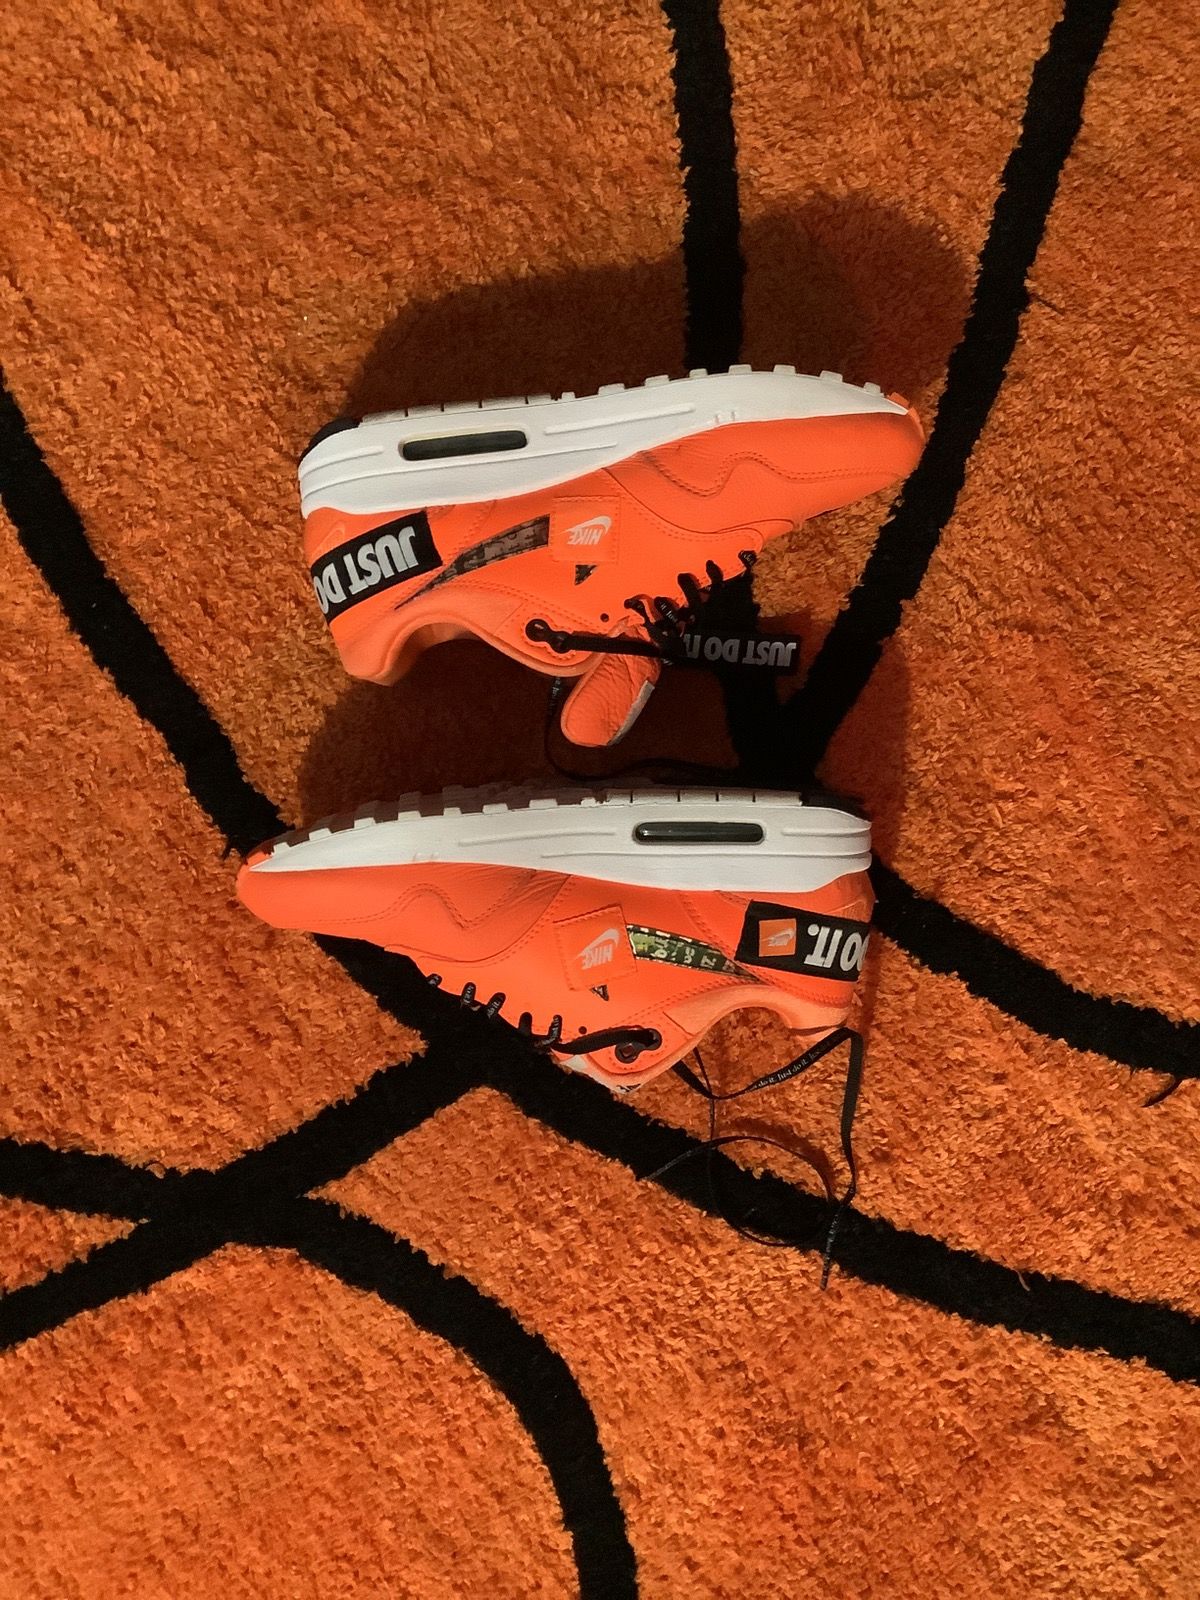 Nike Air Max 1 “Just Do It” Size US 6.5 / EU 39-40 - 2 Preview